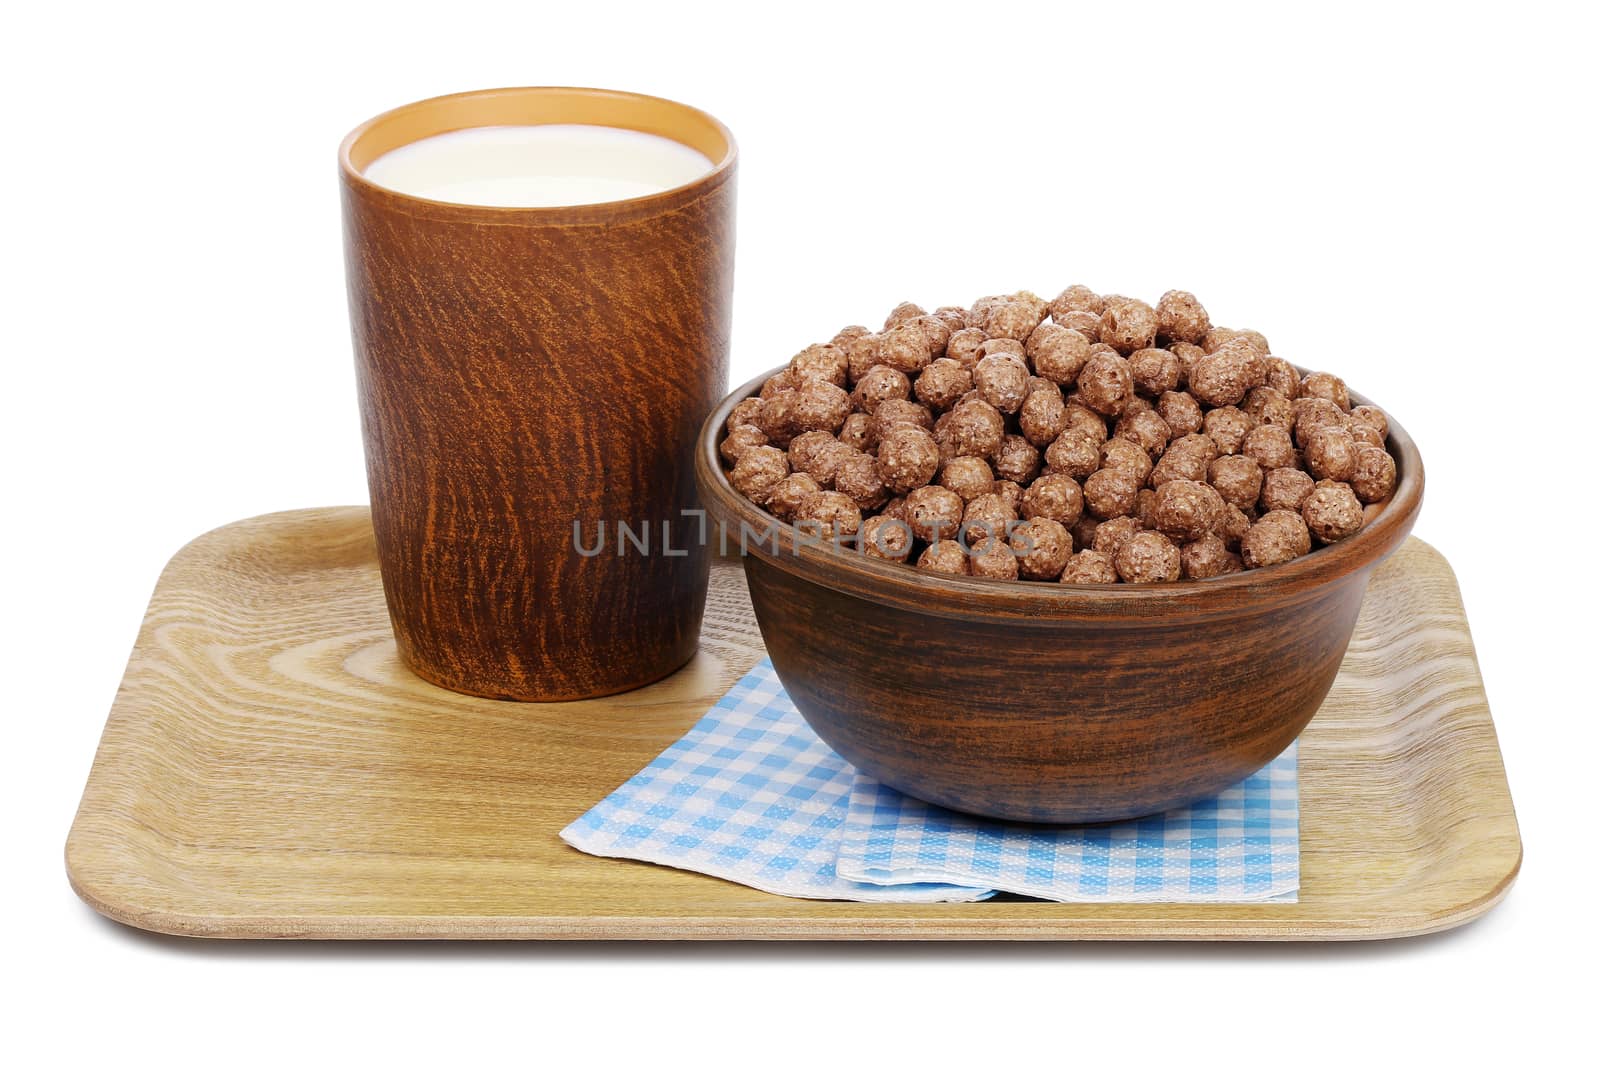 Chocolate cereal balls and milk. by leventina